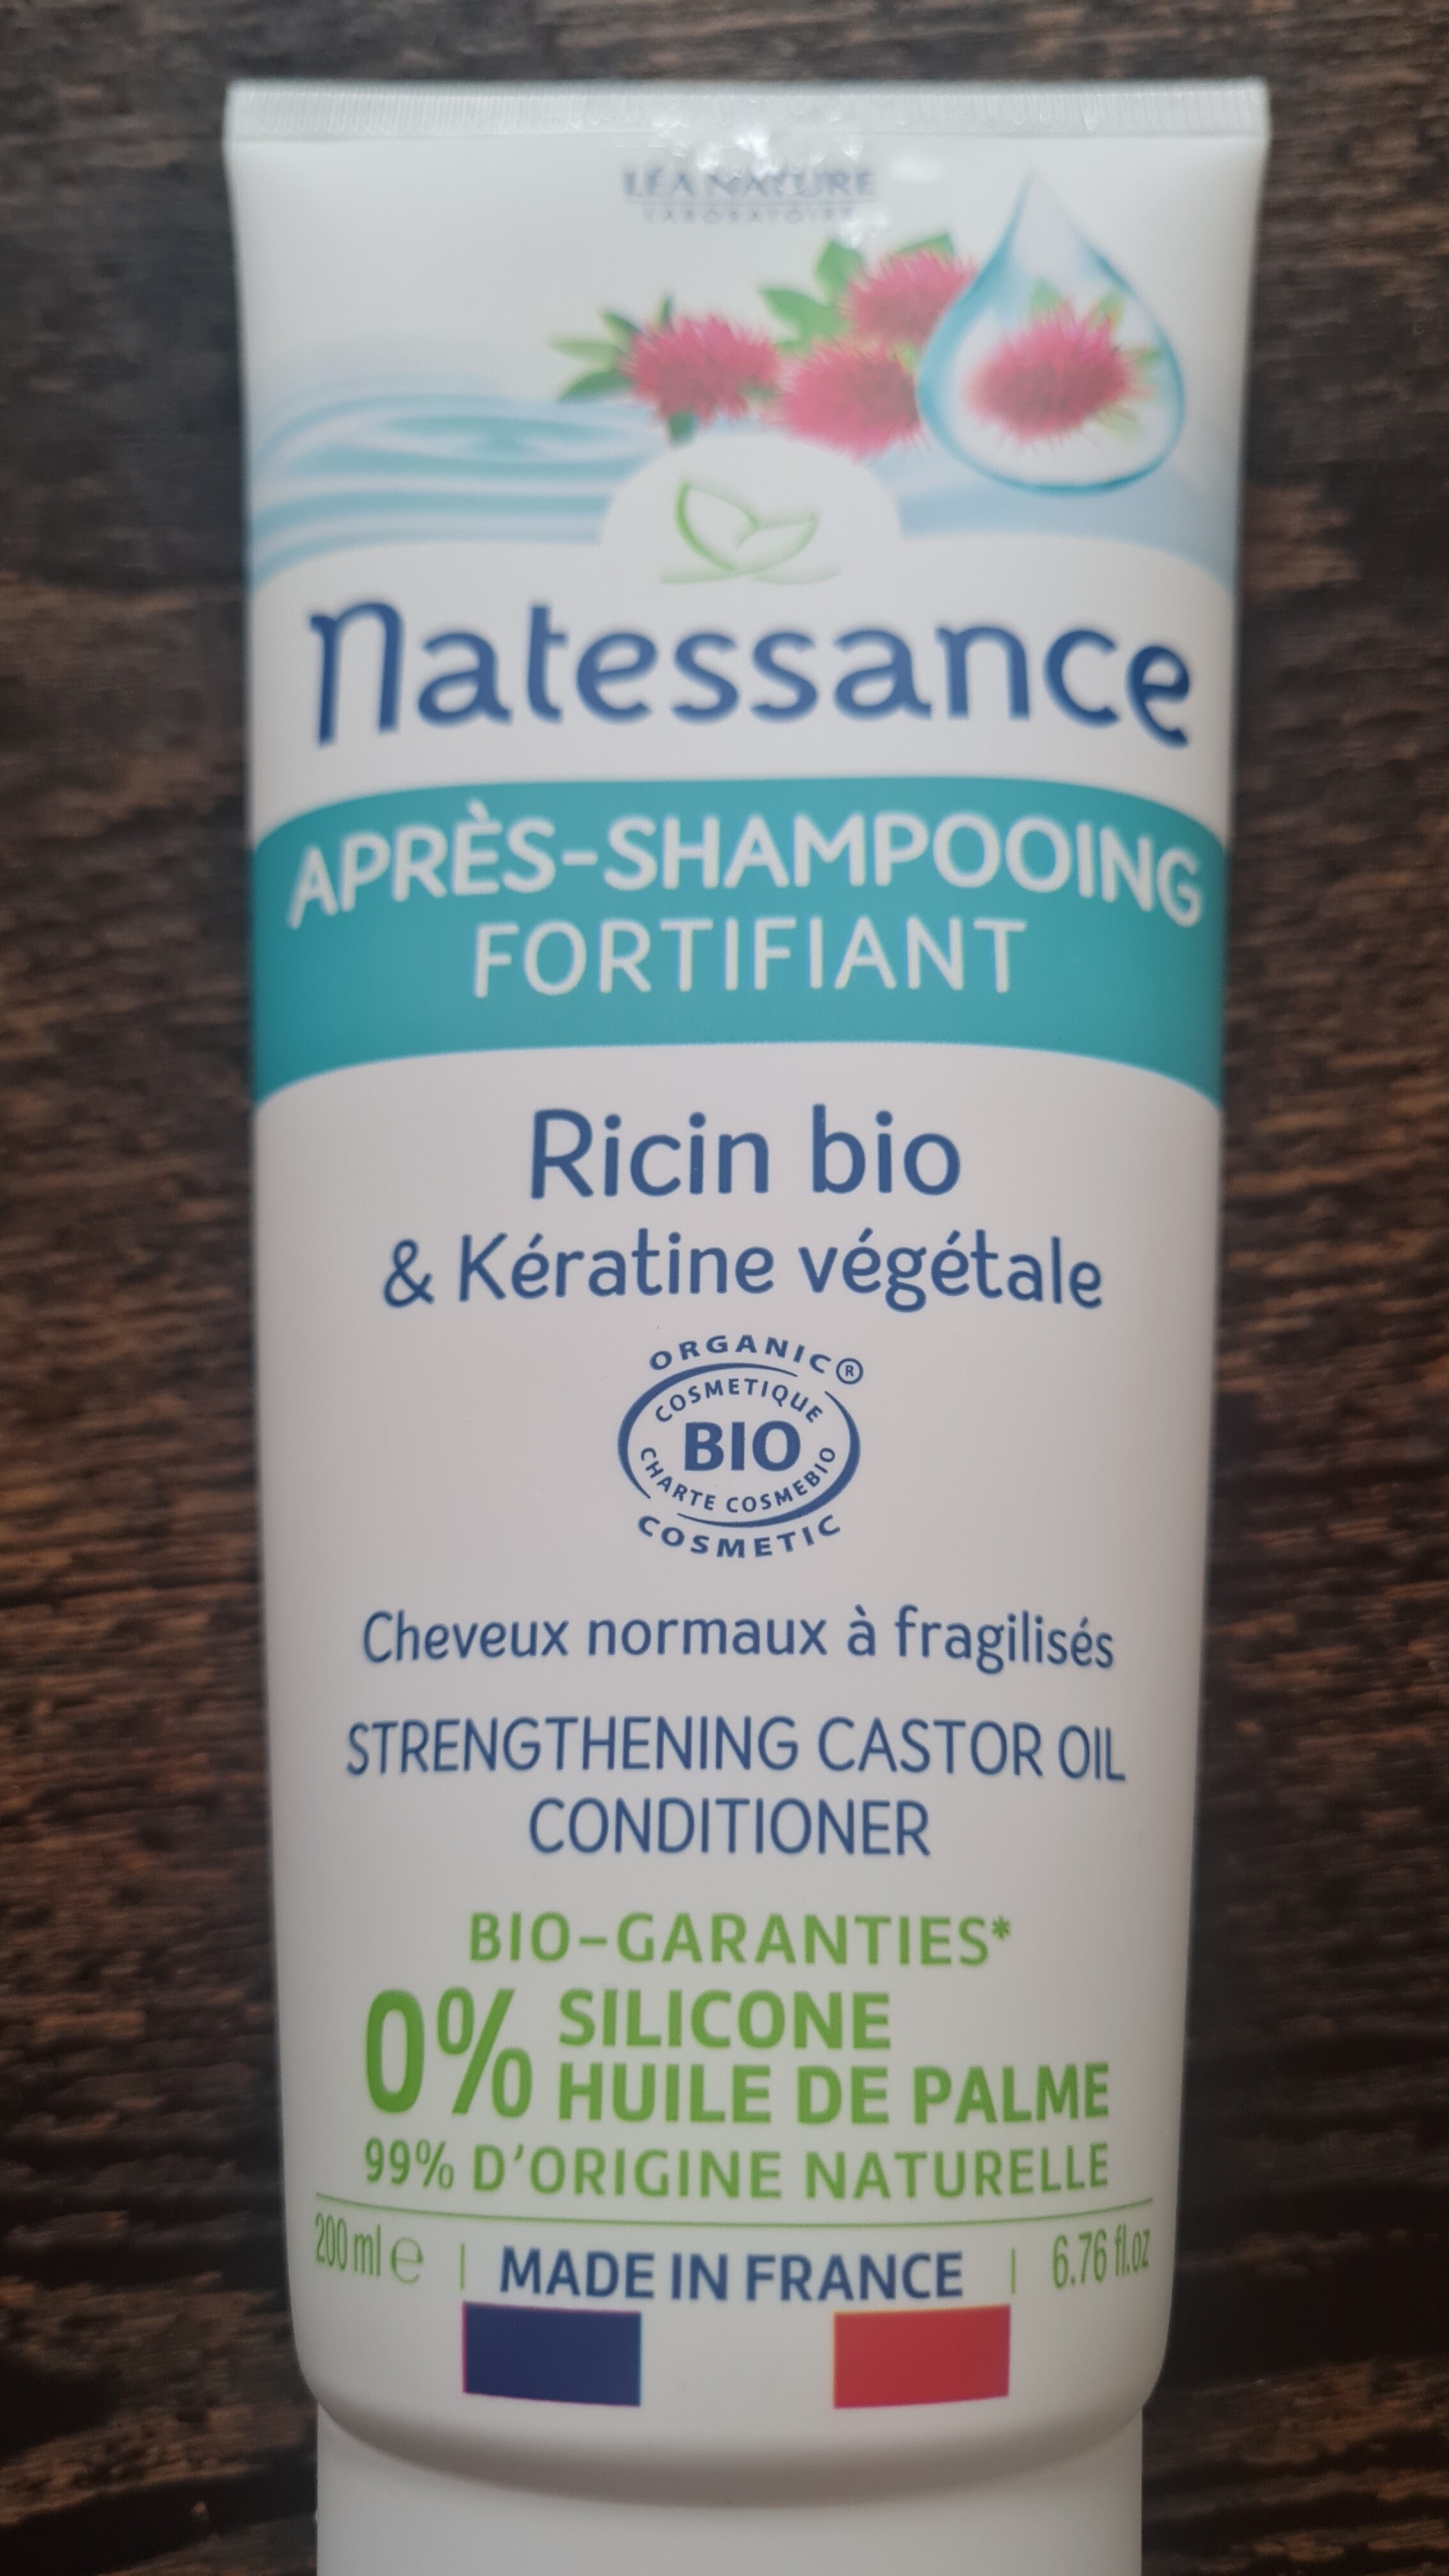 après shampoing fortifiant - Product - fr